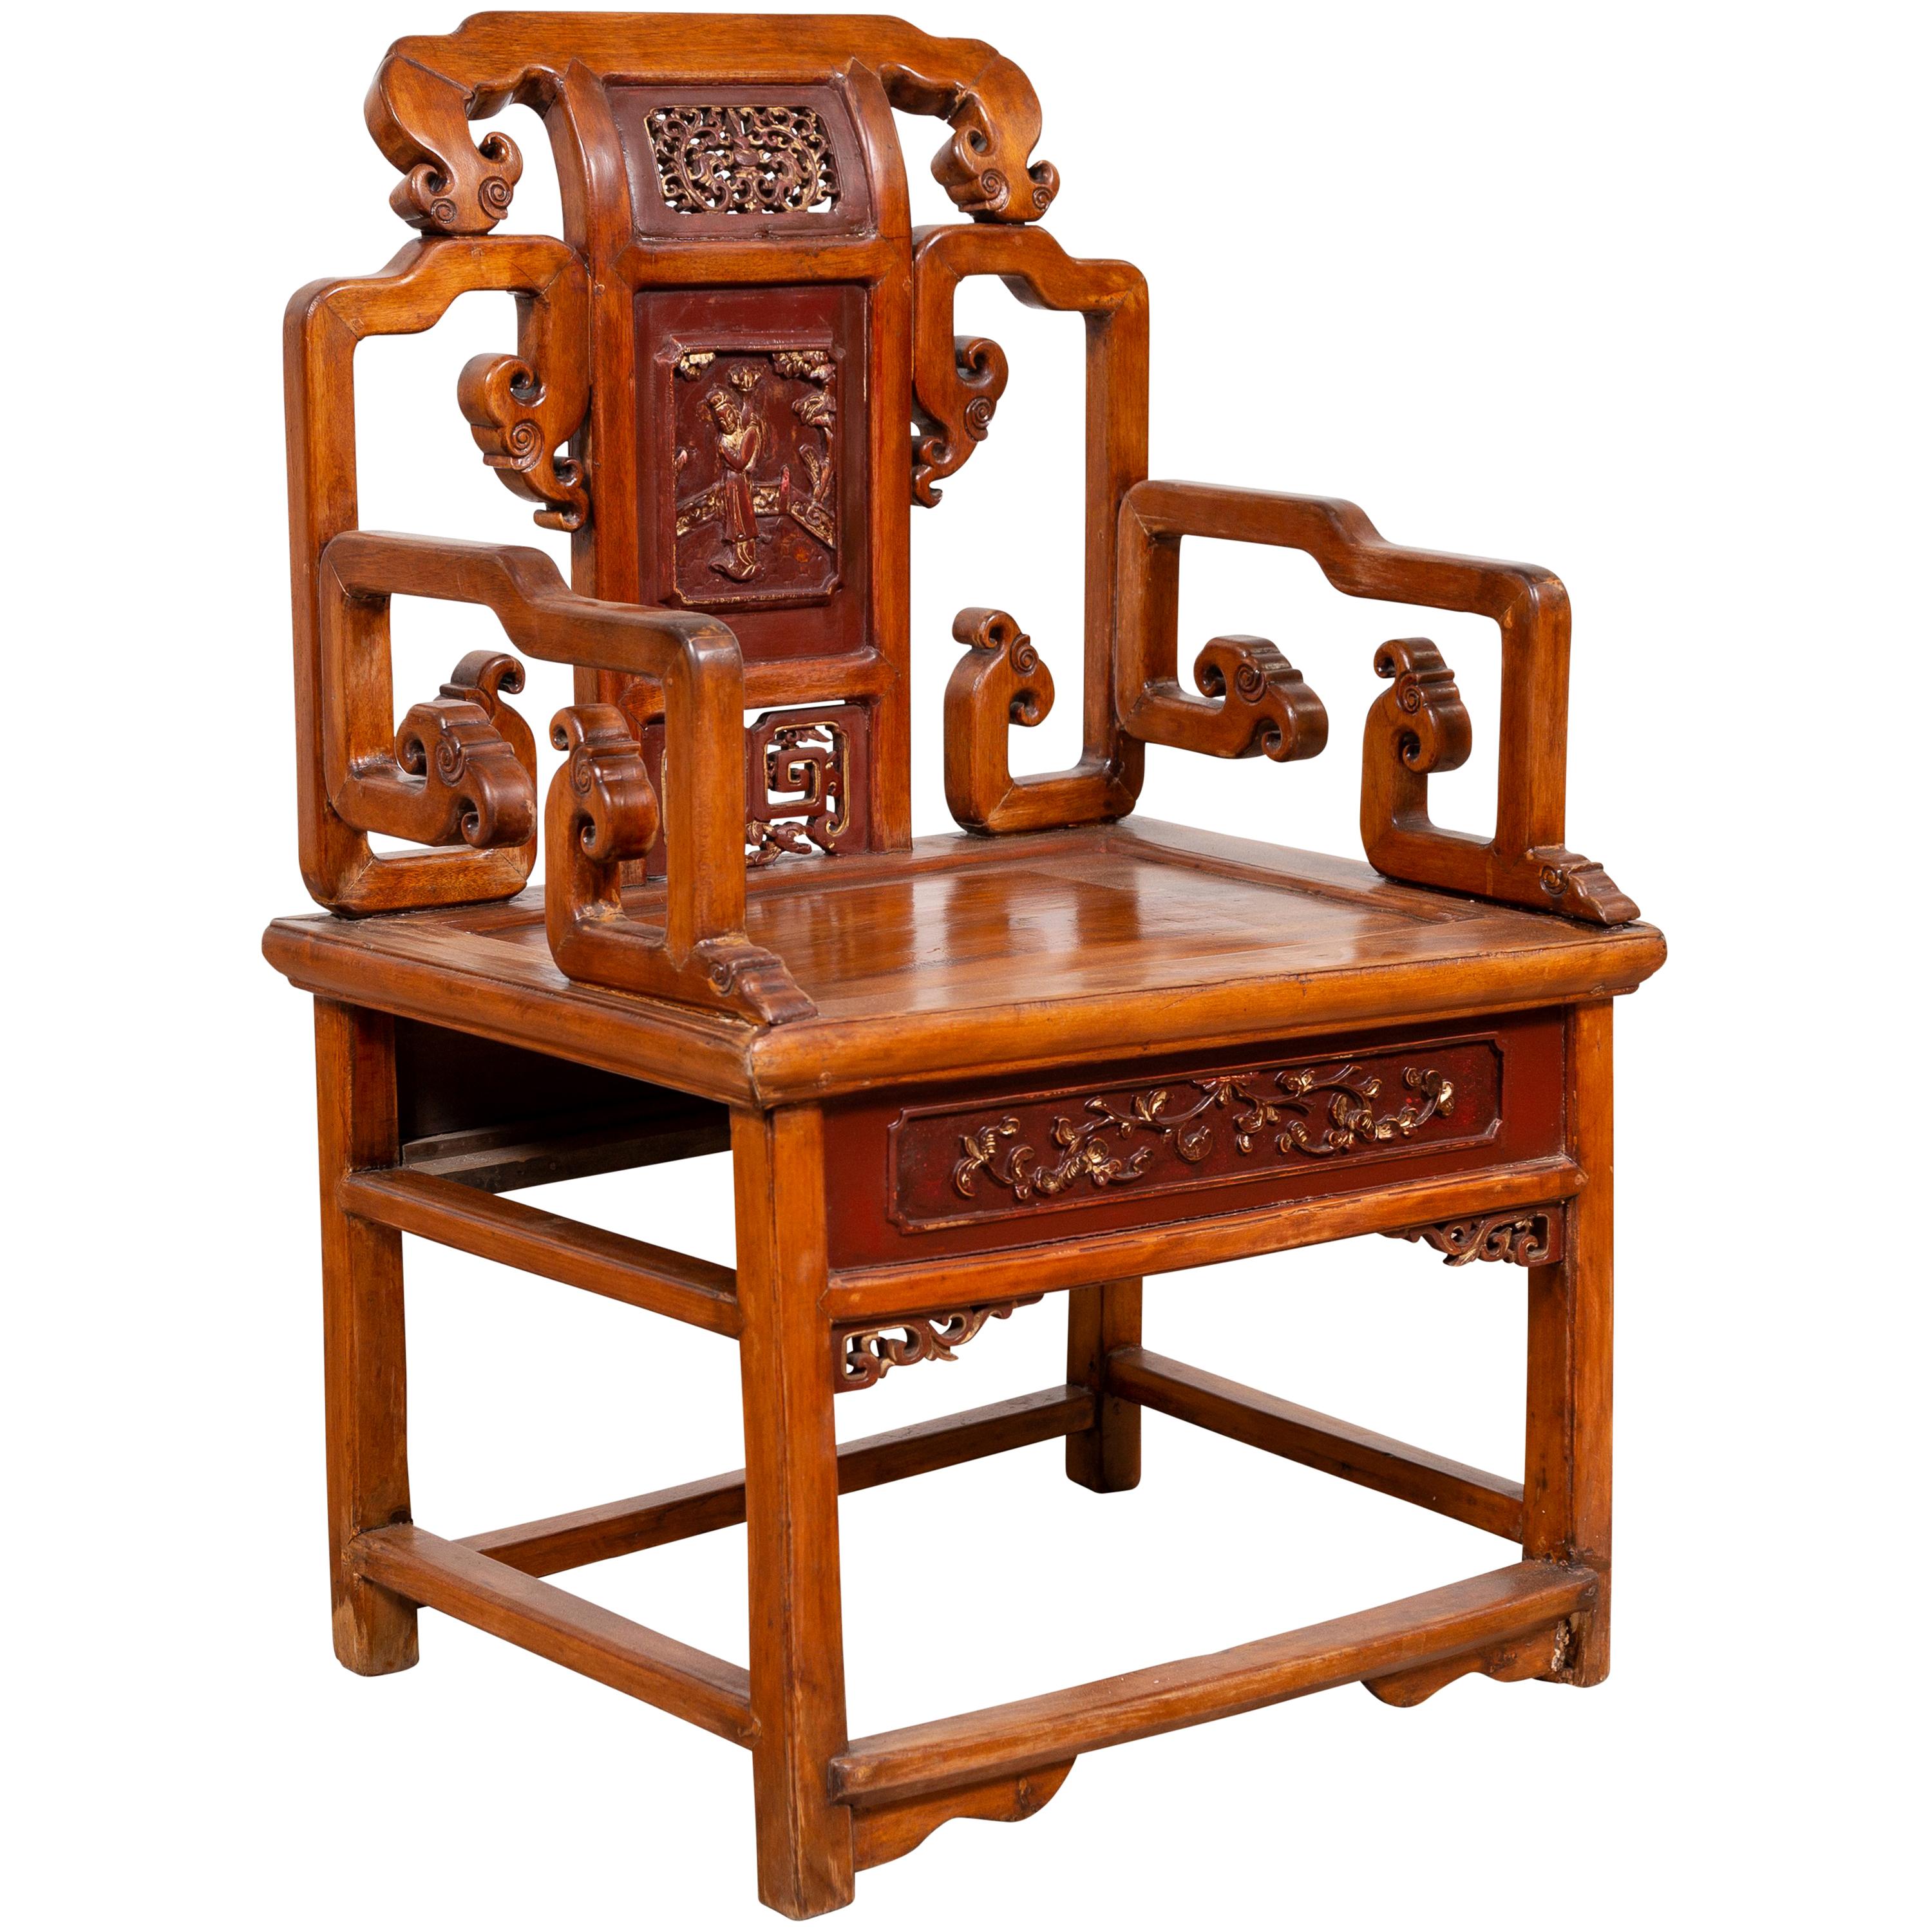 Hand Carved Antique Chinese Chair with Natural Wood Patina and Scroll Décor